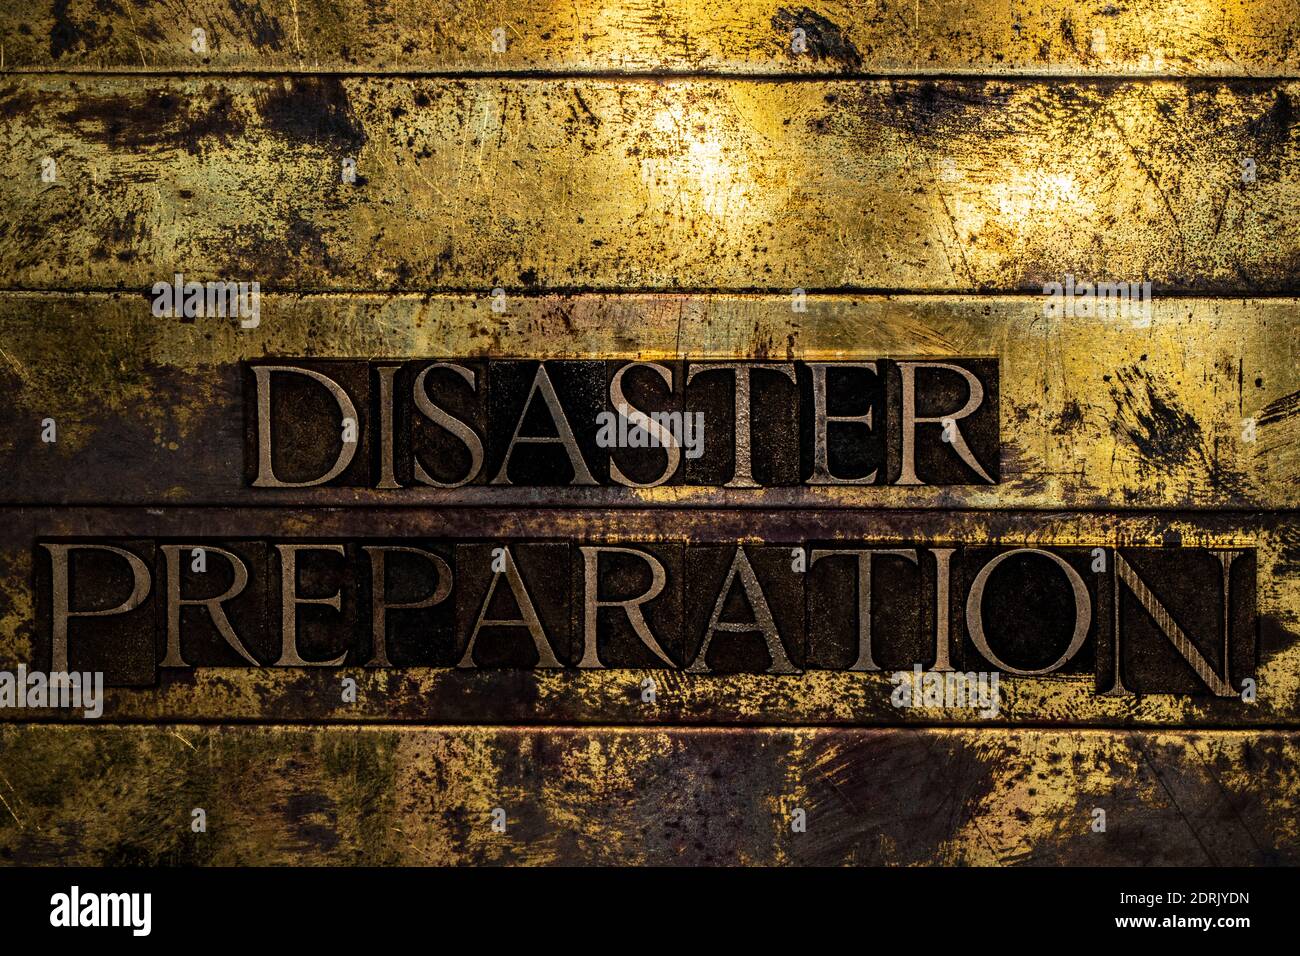 Disaster Preparation text on grunge textured copper and gold background Stock Photo